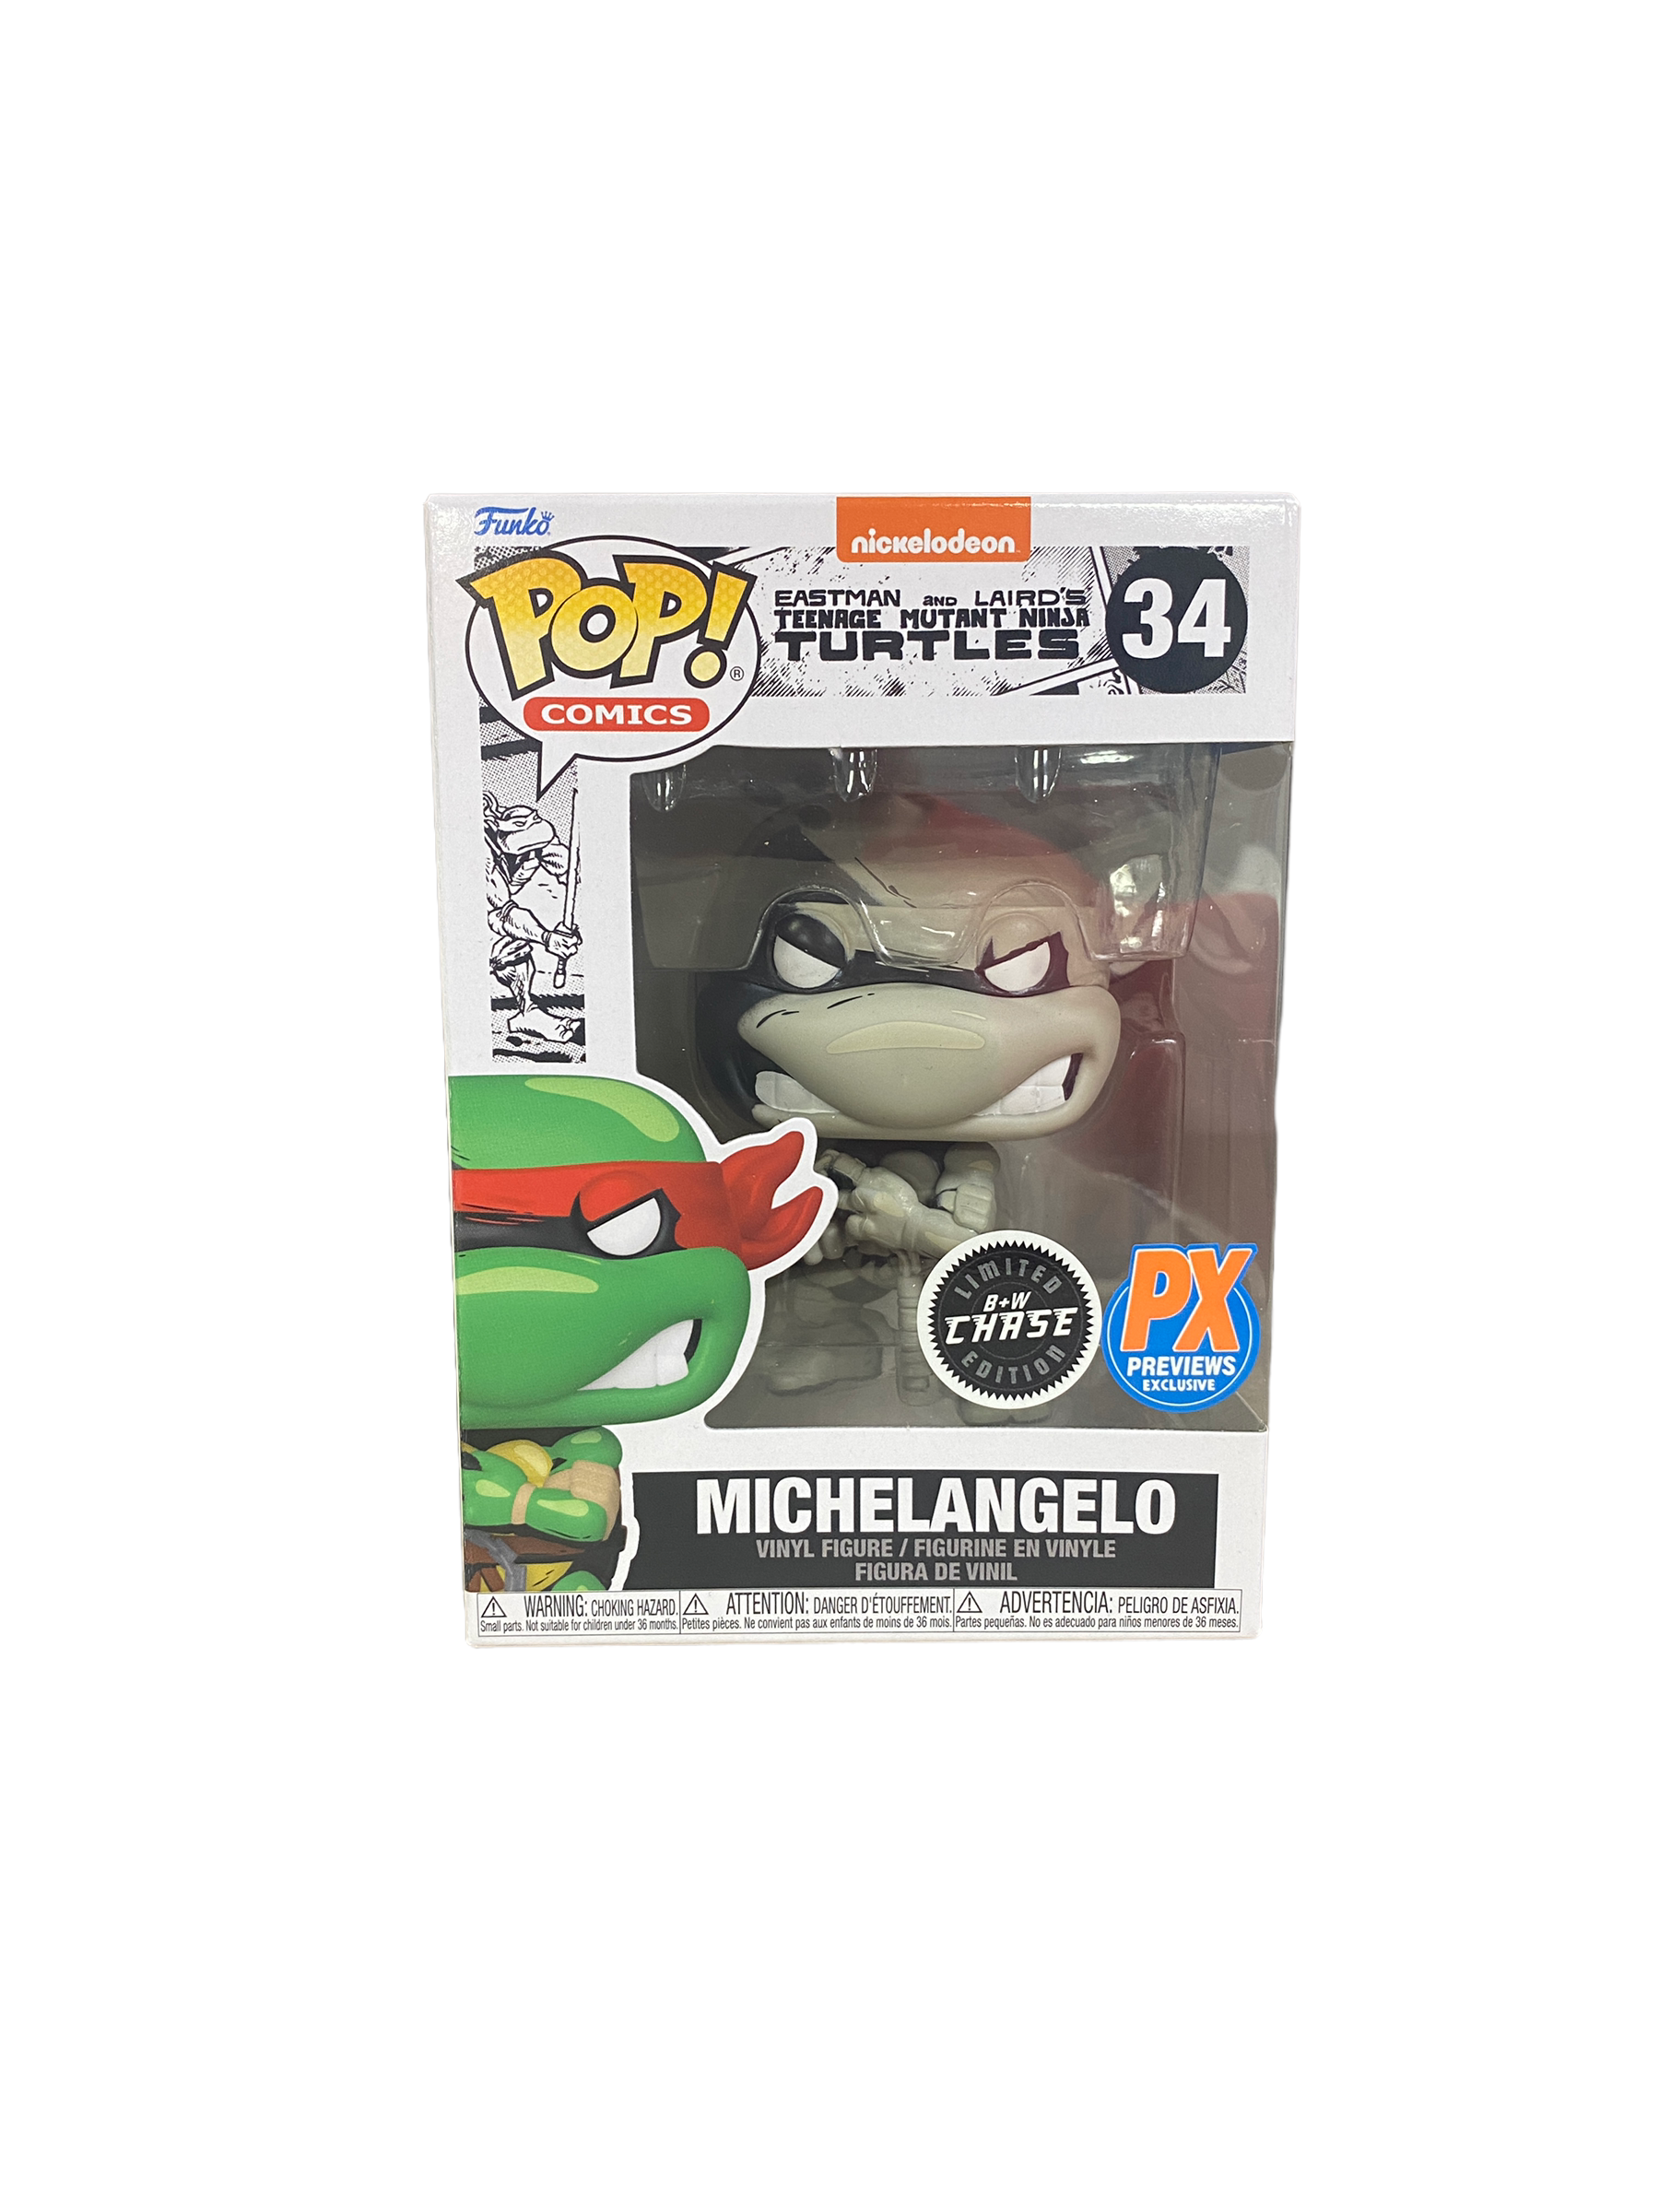 Michelangelo #34 (Black And White Chase) Funko Pop! - Eastman And Laird's Teenage Mutant Ninja Turtles - PX Previews Exclusive - Condition 9.5+/10